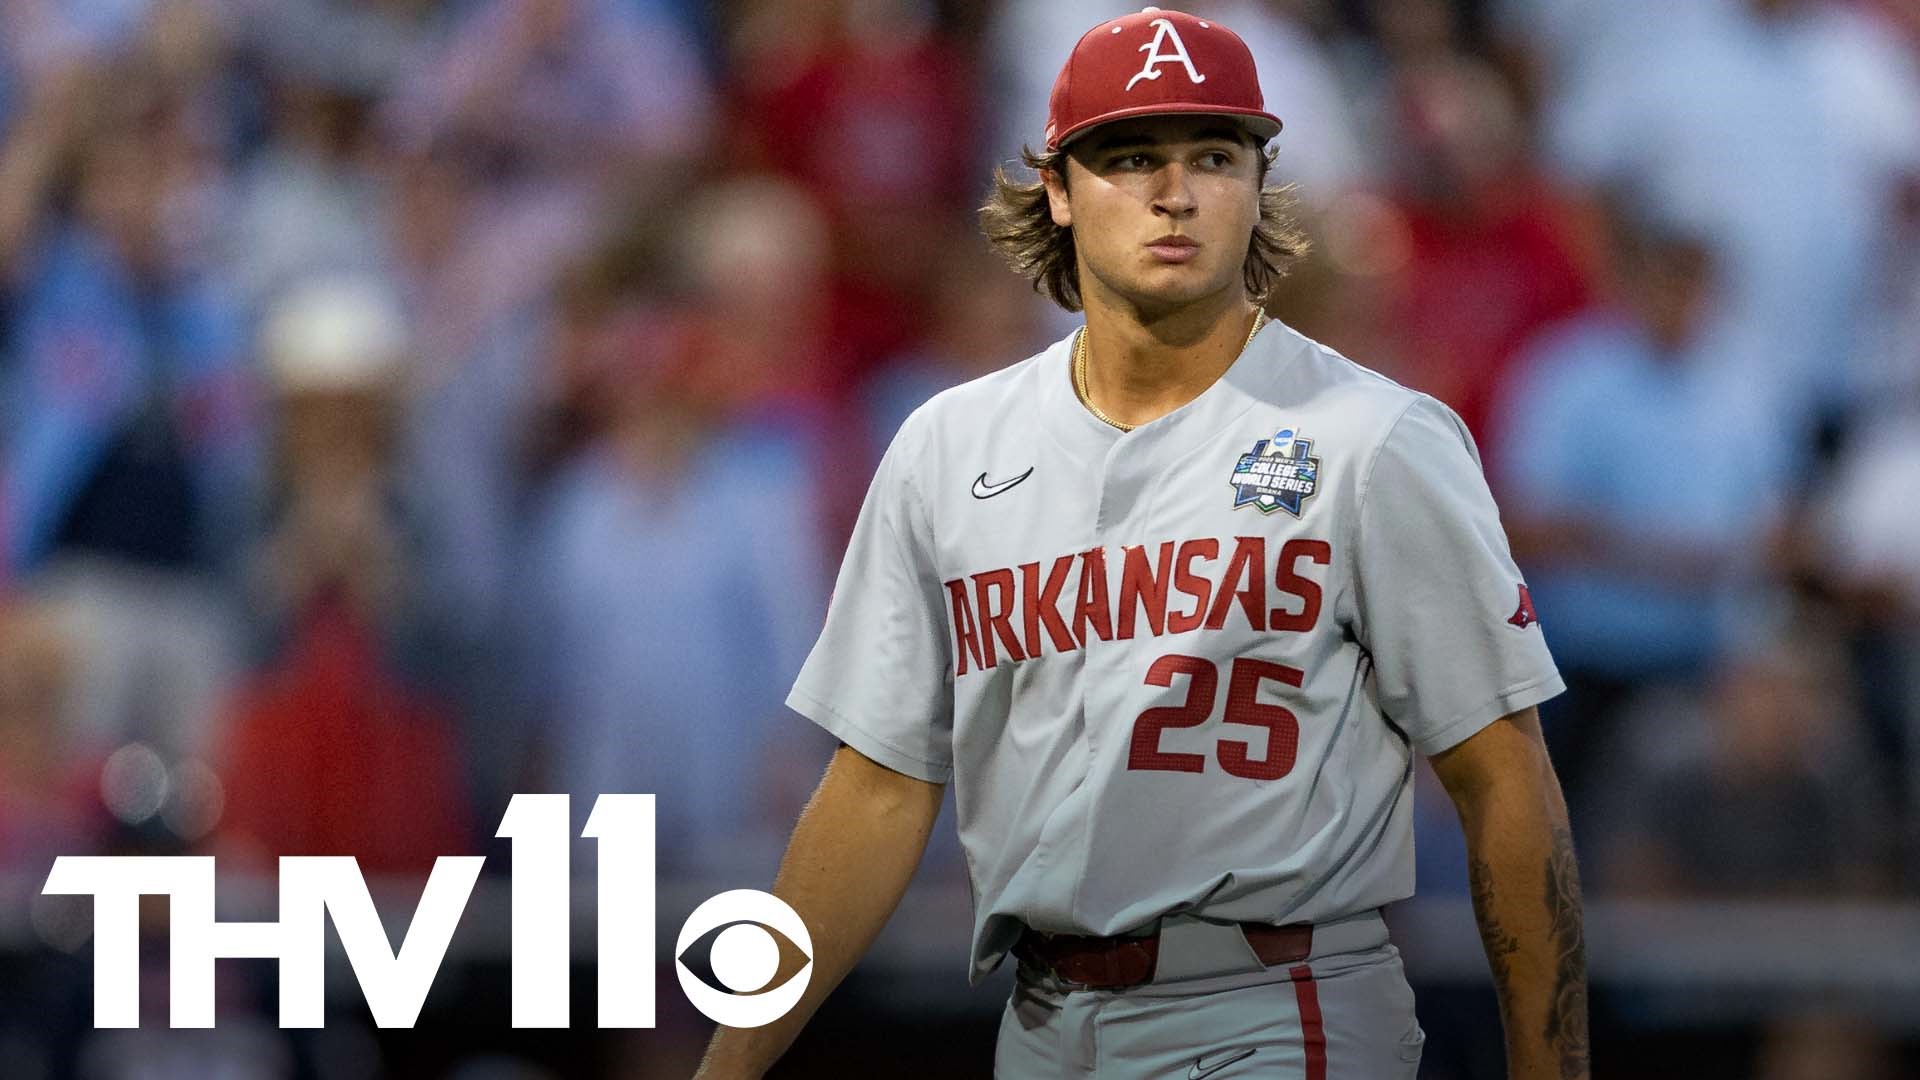 The Diamond Hogs’ season officially comes to an end after they fell to Ole Miss on Thursday. This brings the Razorbacks’ postseason run to an end.